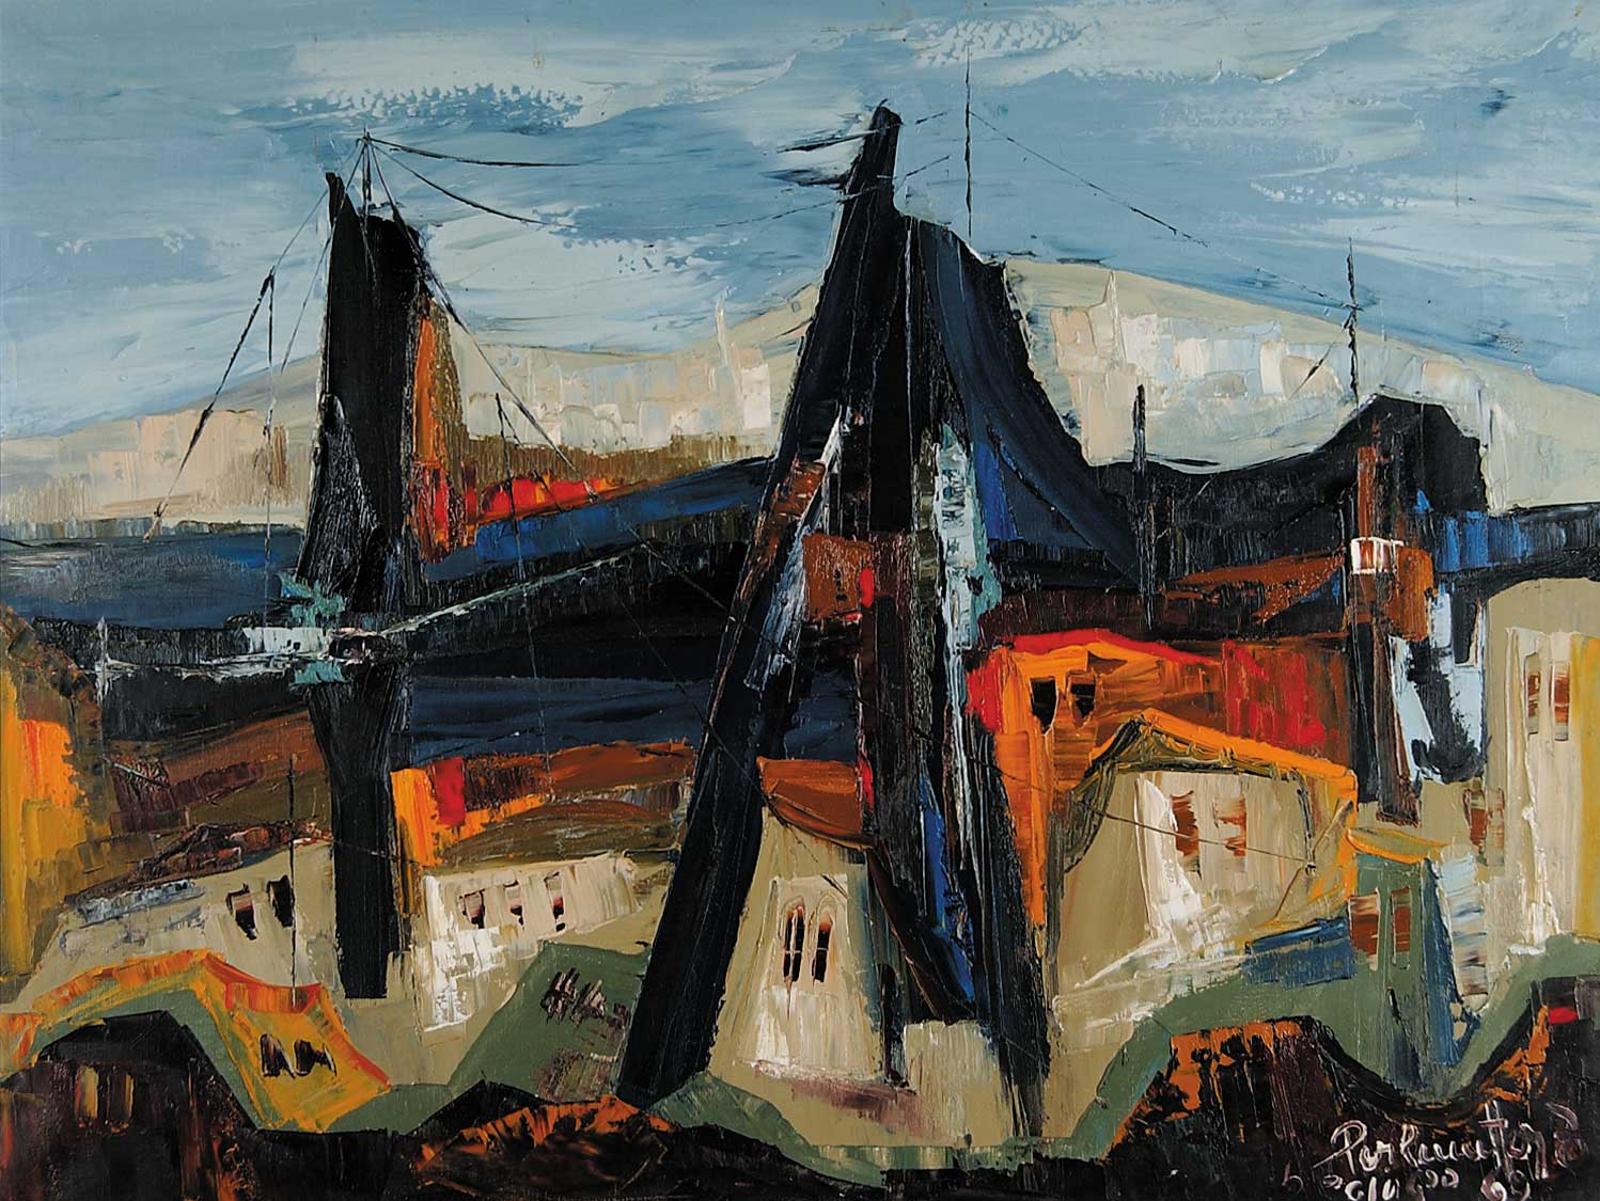 Zoltan Perlmutter (1922-2002) - Untitled - Abstract Townscape